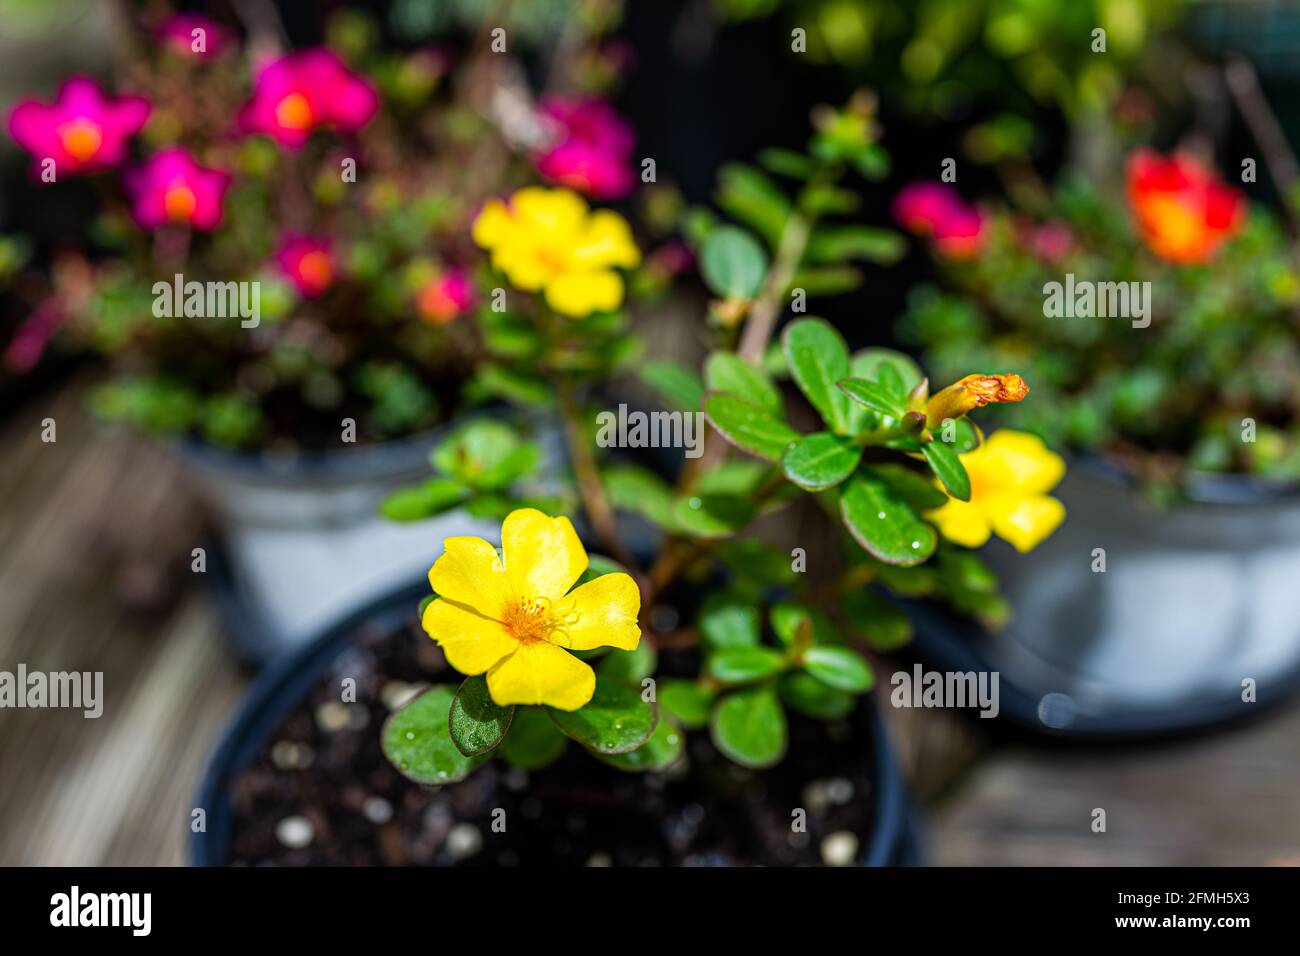 Macro closeup of green red and yellow flowers edible purslane plant in pot flowerpot outside blooming in garden with texture Stock Photo